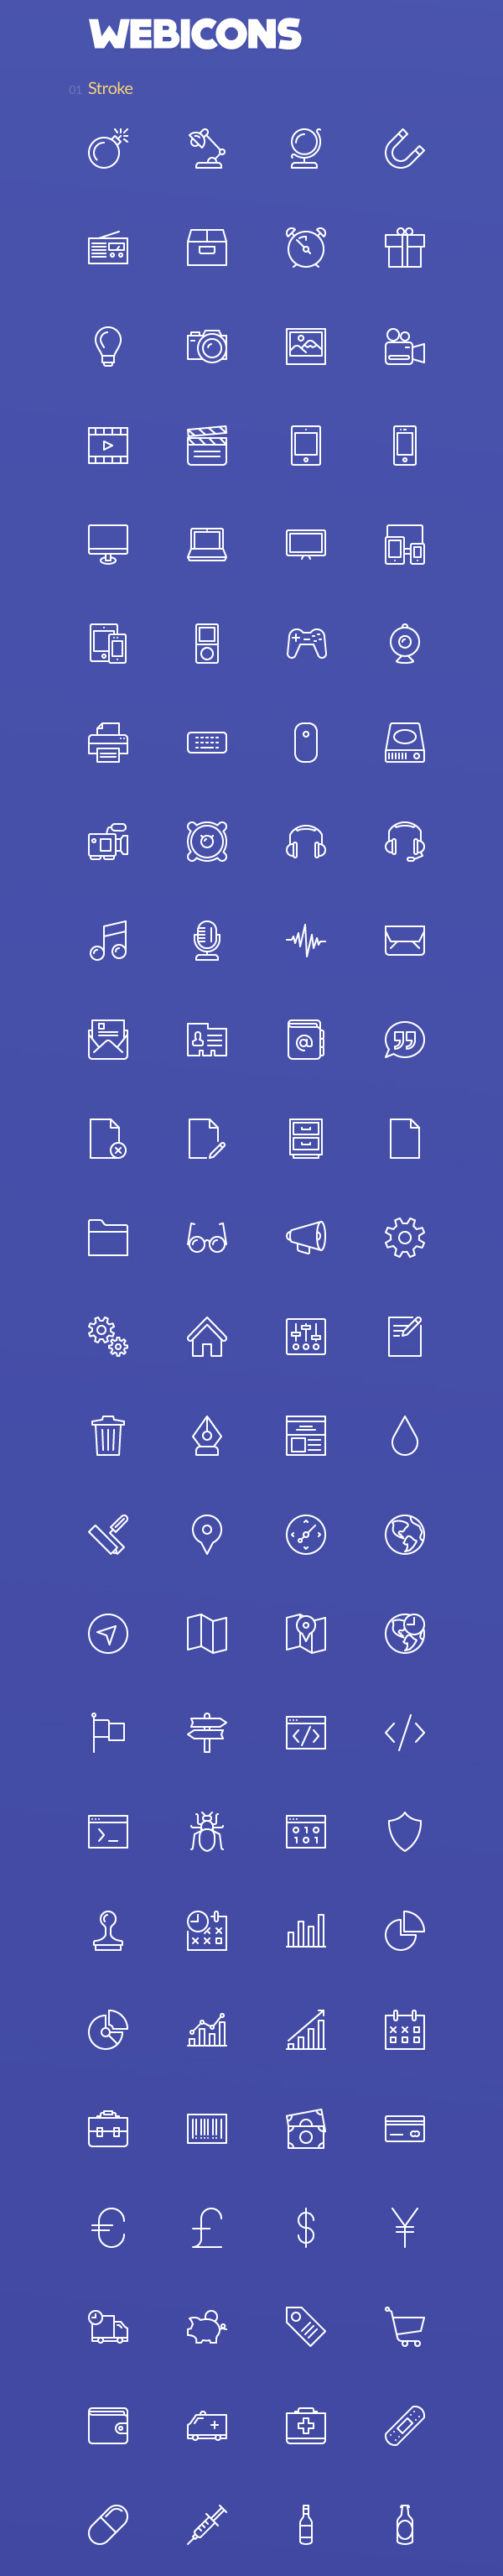 Webicons – Stroke & Fill Icons (100 Icons)